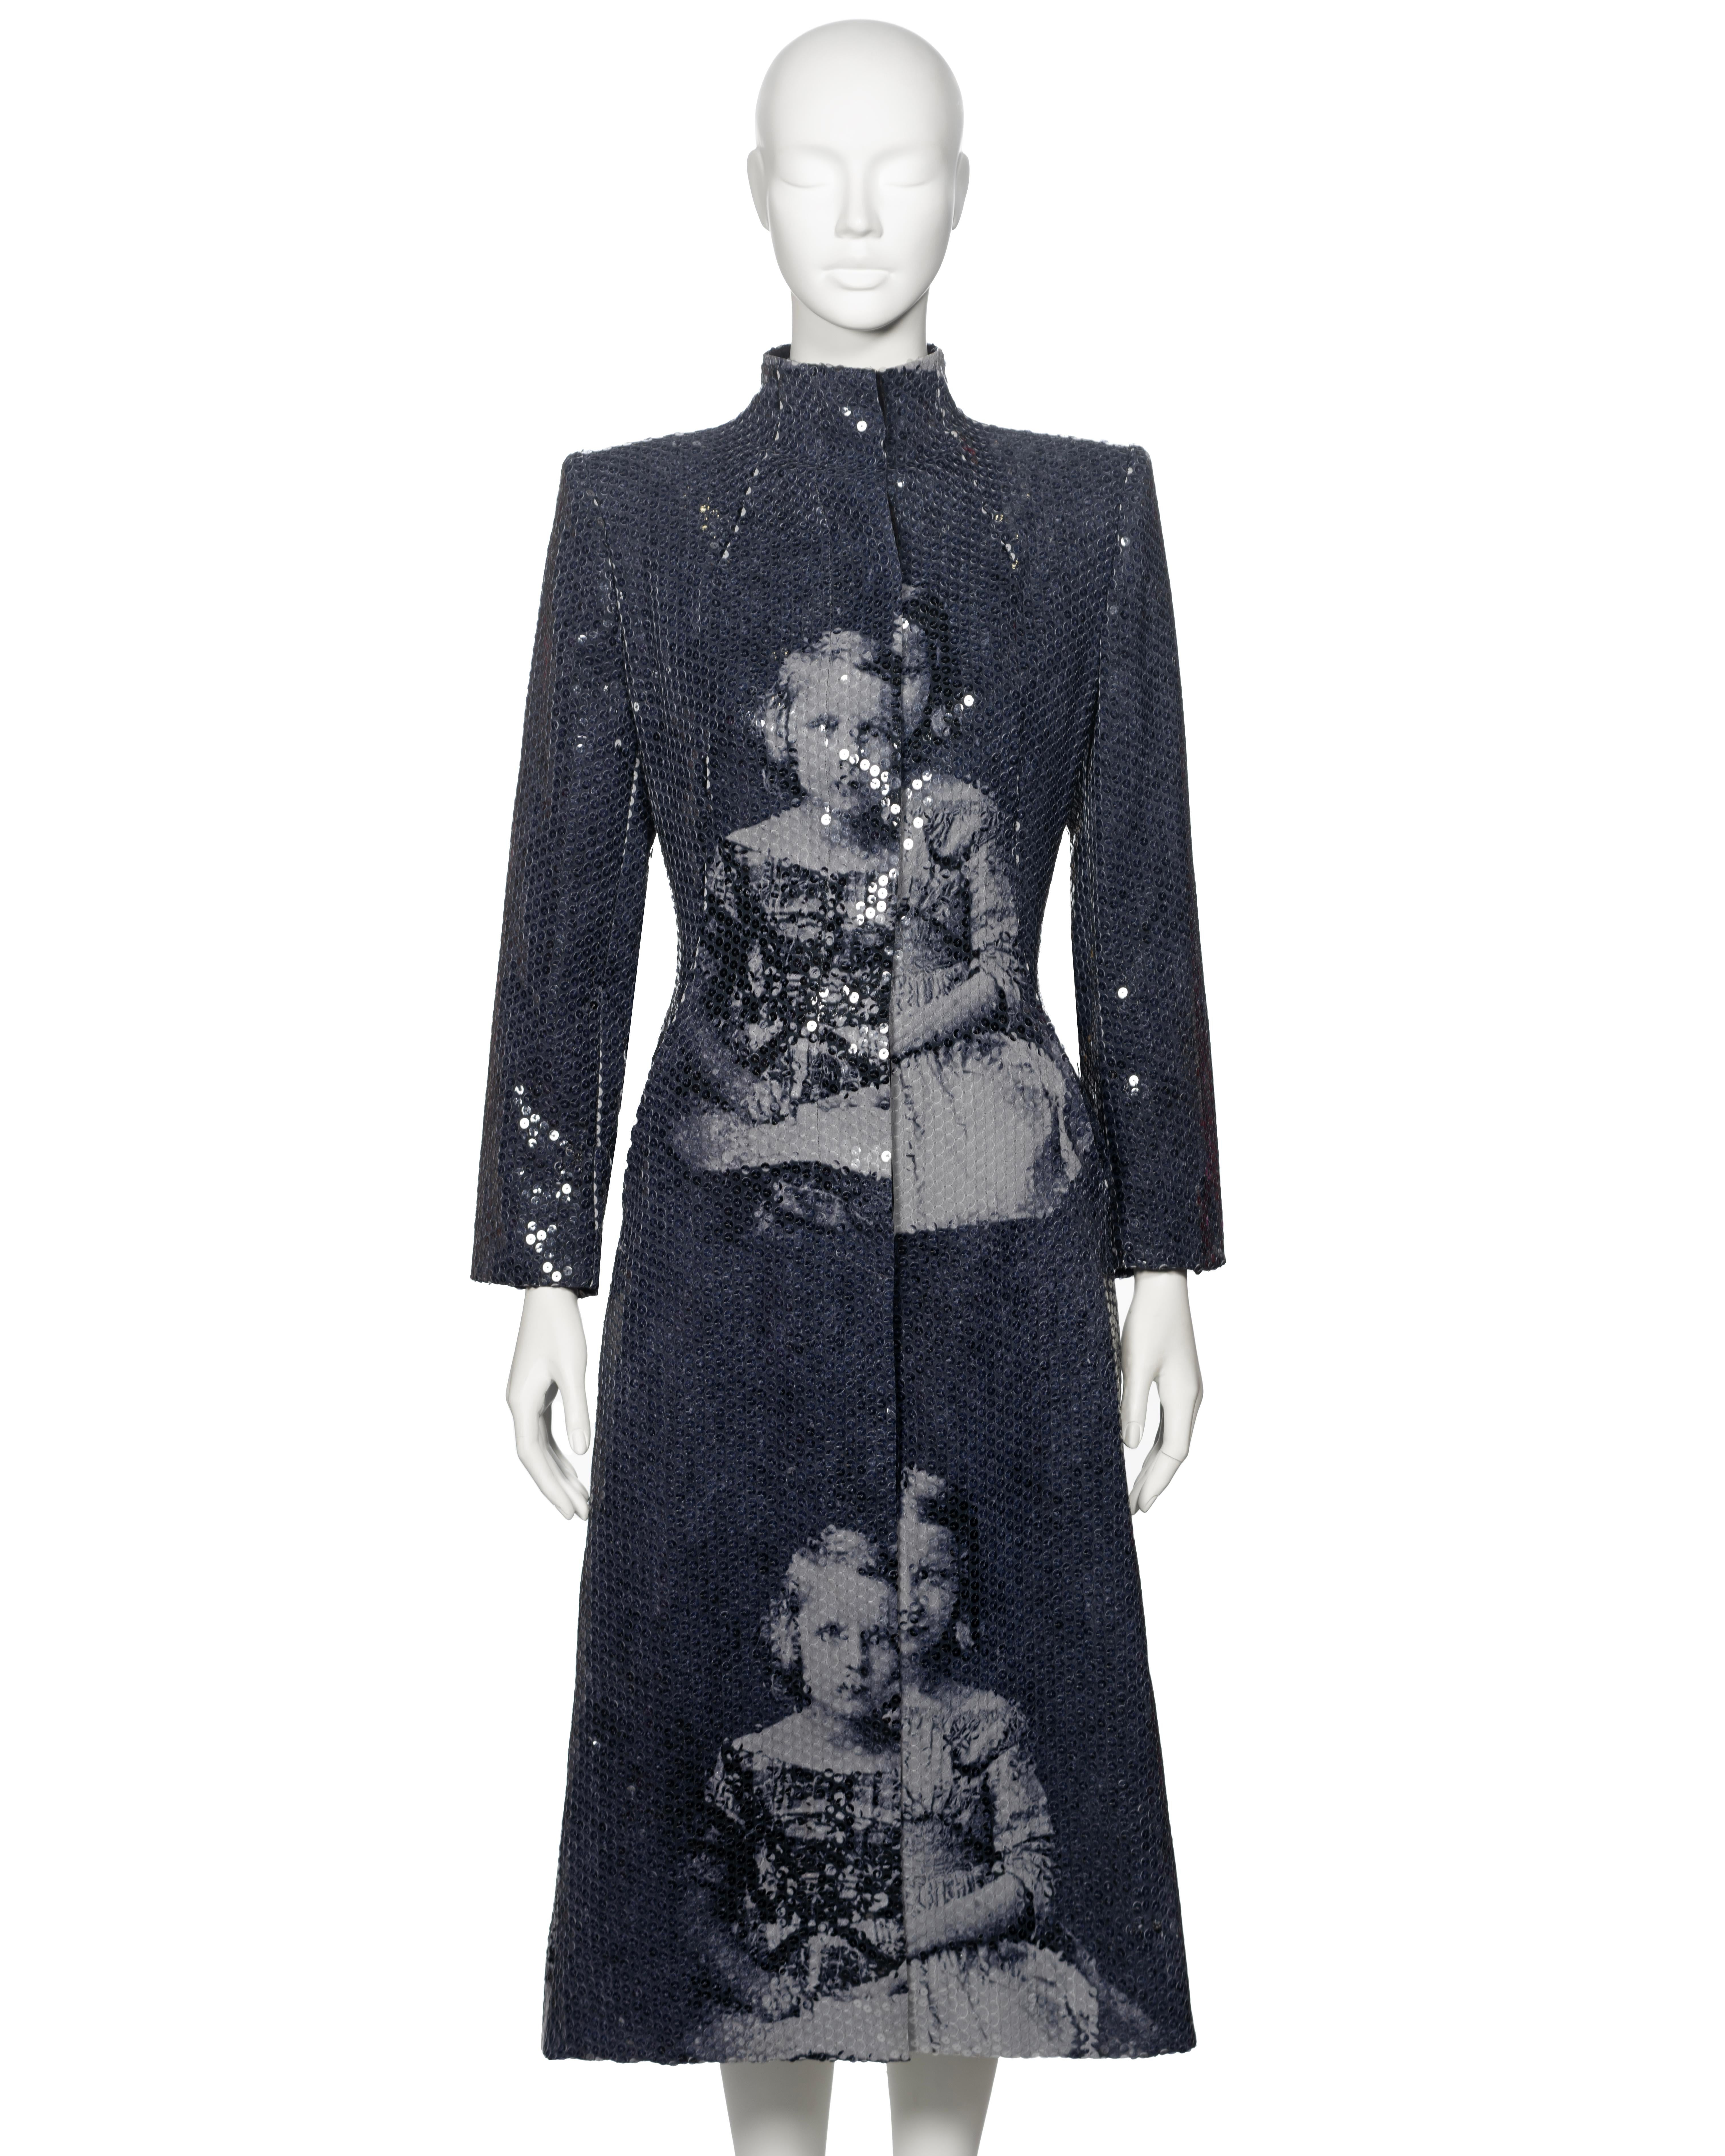 ▪ Archival Alexander McQueen Sequin Evening Coat
▪ Creative Director: Alexander McQueen
▪ Joan Collection, Fall-Winter 1998
▪ Museum Grade 
▪ Sequins printed with the 1845 image of three girls by photographer Carl Gustav Oehme
▪ Concealed front